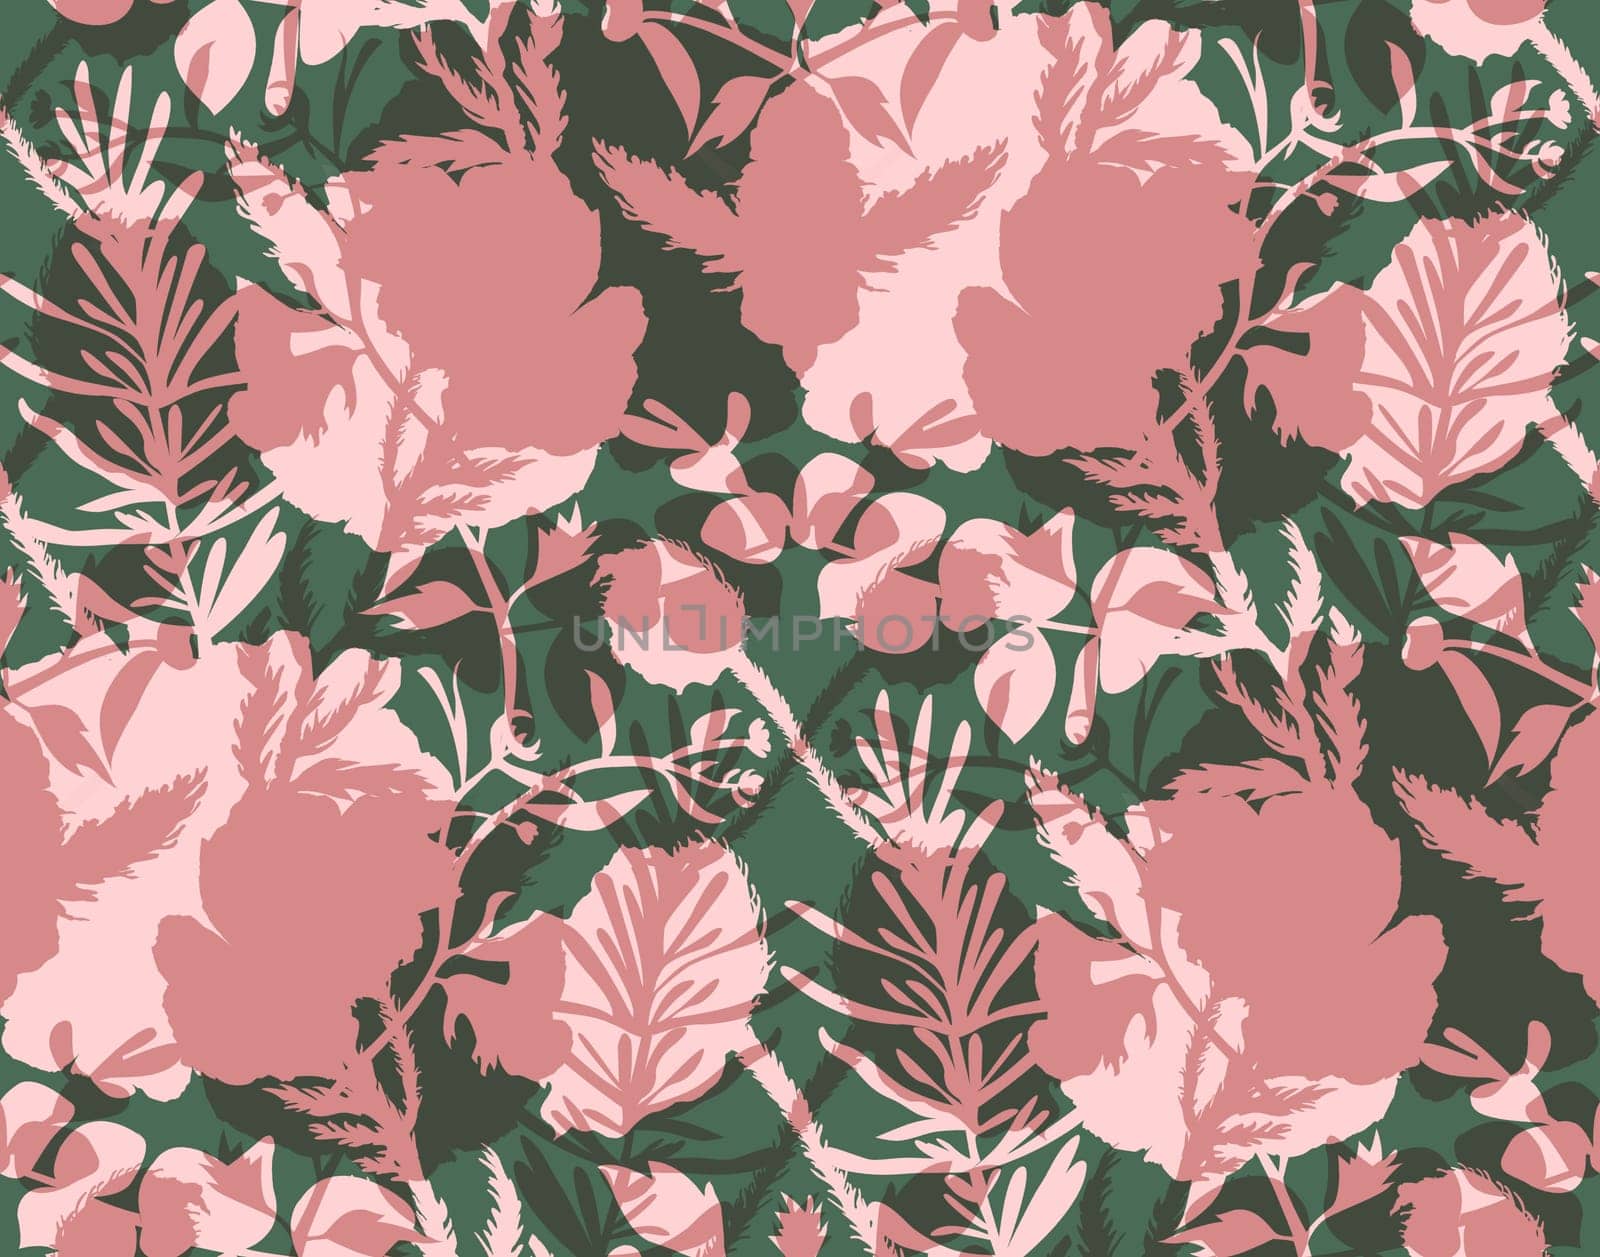 Seamless pattern with silhouettes of flowers in green and red shades by MarinaVoyush